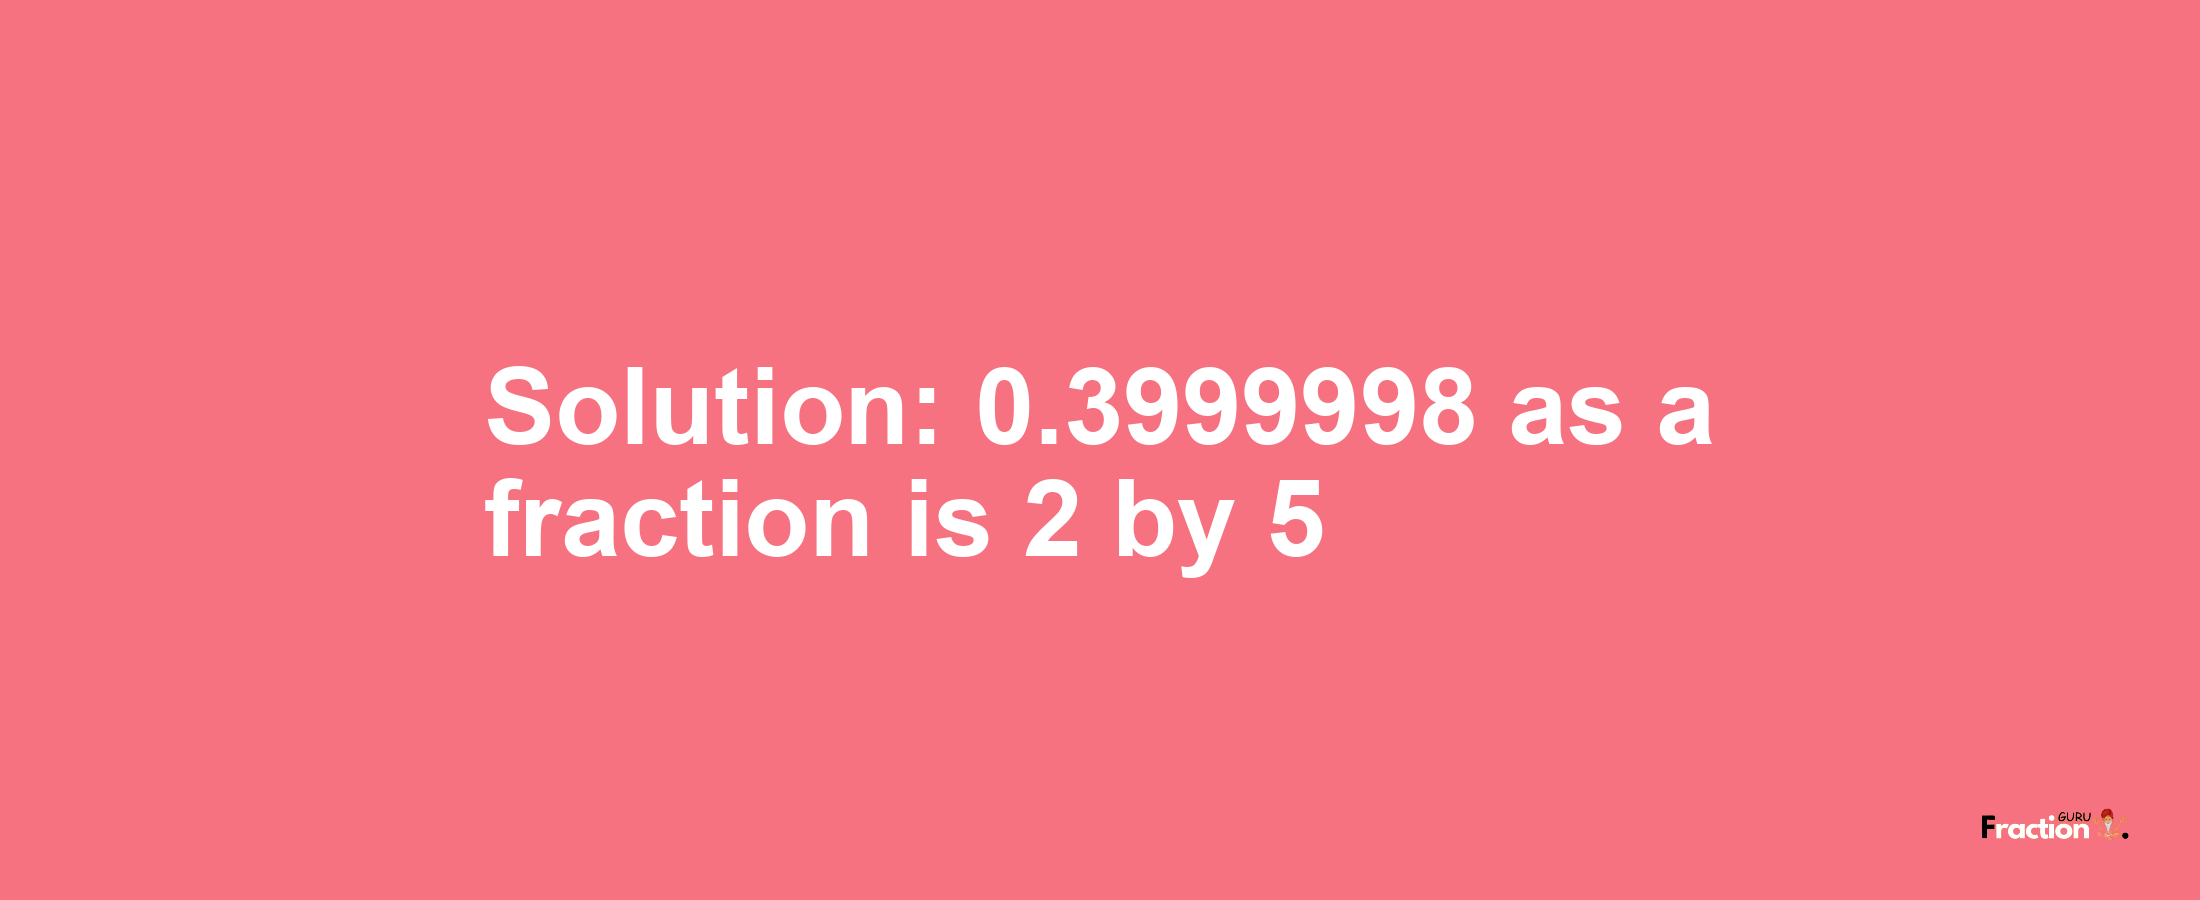 Solution:0.3999998 as a fraction is 2/5